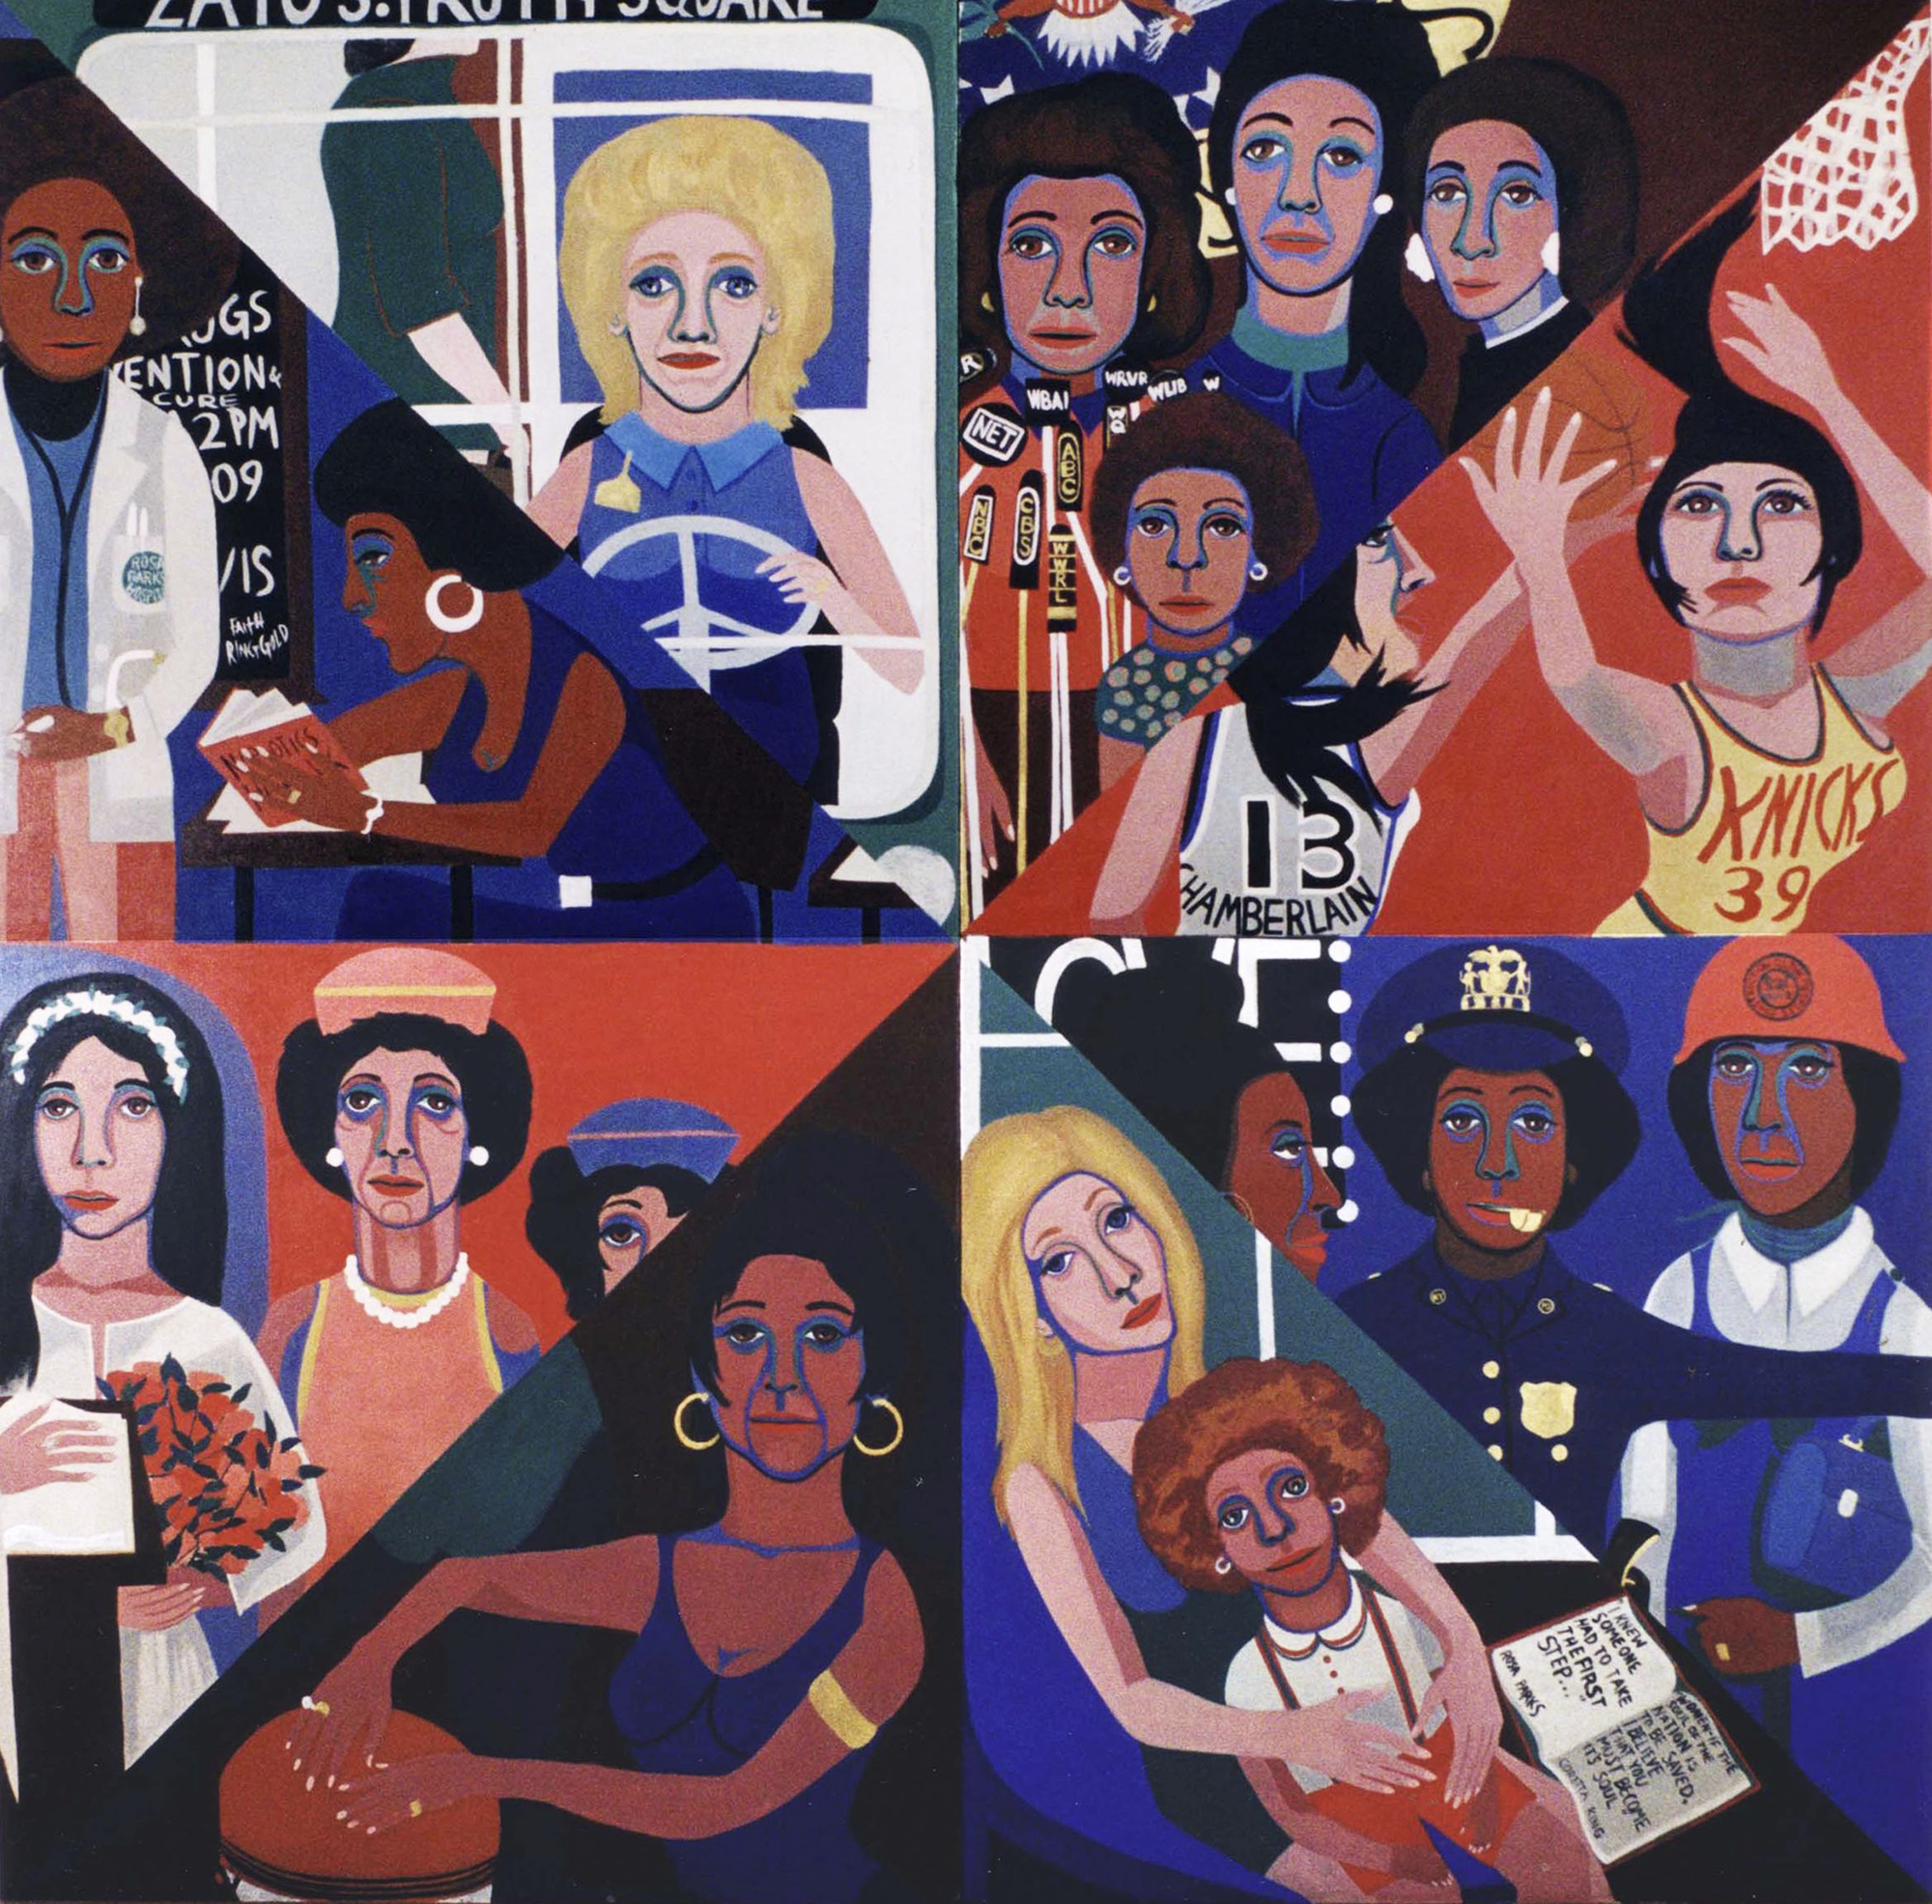 Faith Ringgold (American, born 1930). For the Women’s House, 1971. Oil on canvas, 96 x 96 in. (243.8 x 243.8 cm). Courtesy of Rose M. Singer Center, Rikers Island Correctional Center. © 2017 Faith Ringgold / Artists Rights Society (ARS), New YorkThe entire Work is to be reproduced without cropping.